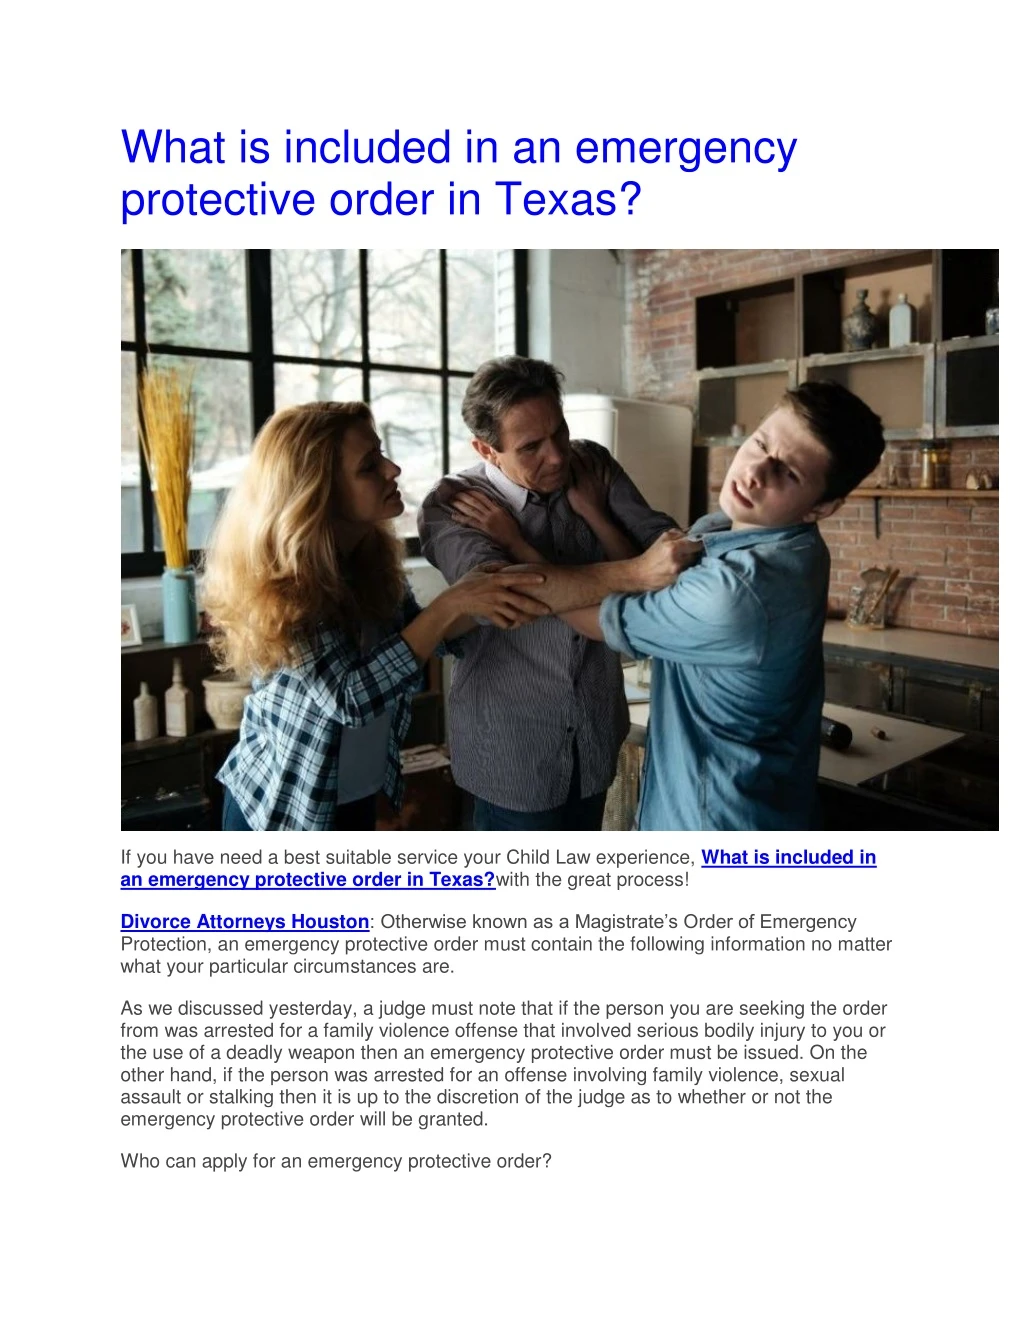 what is included in an emergency protective order